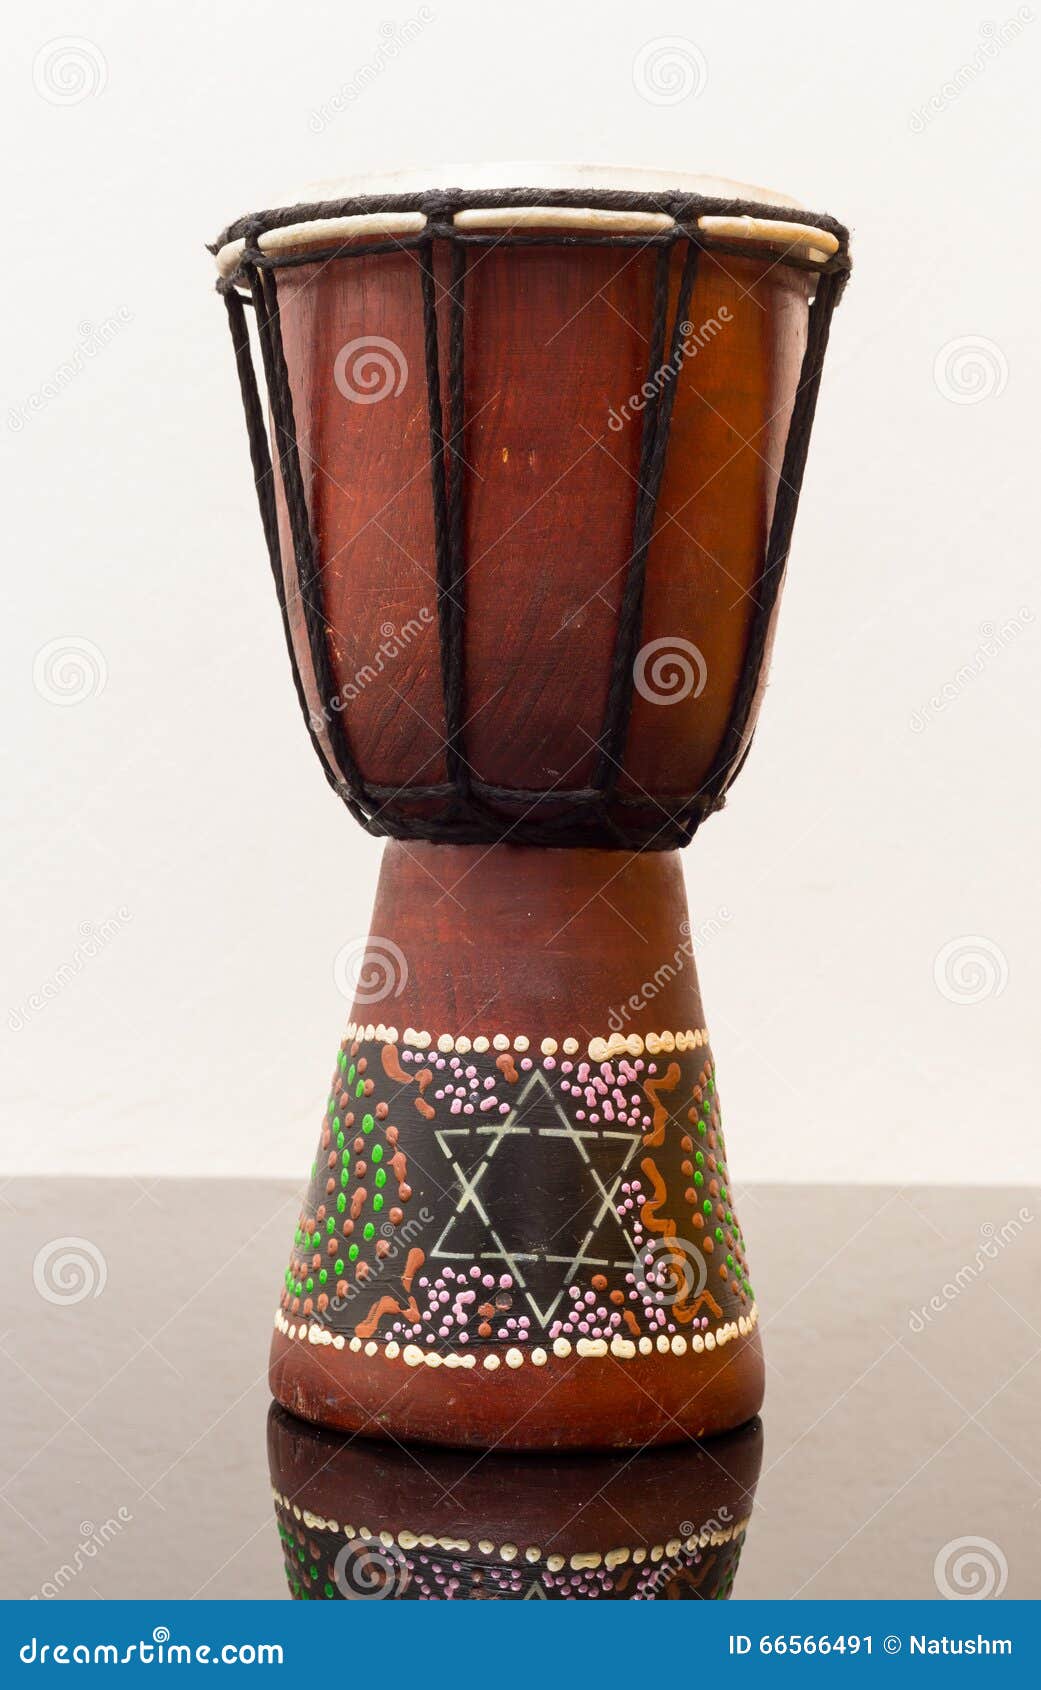 Darbouka Designed . Made of Wood Stock Image - Image of instrument